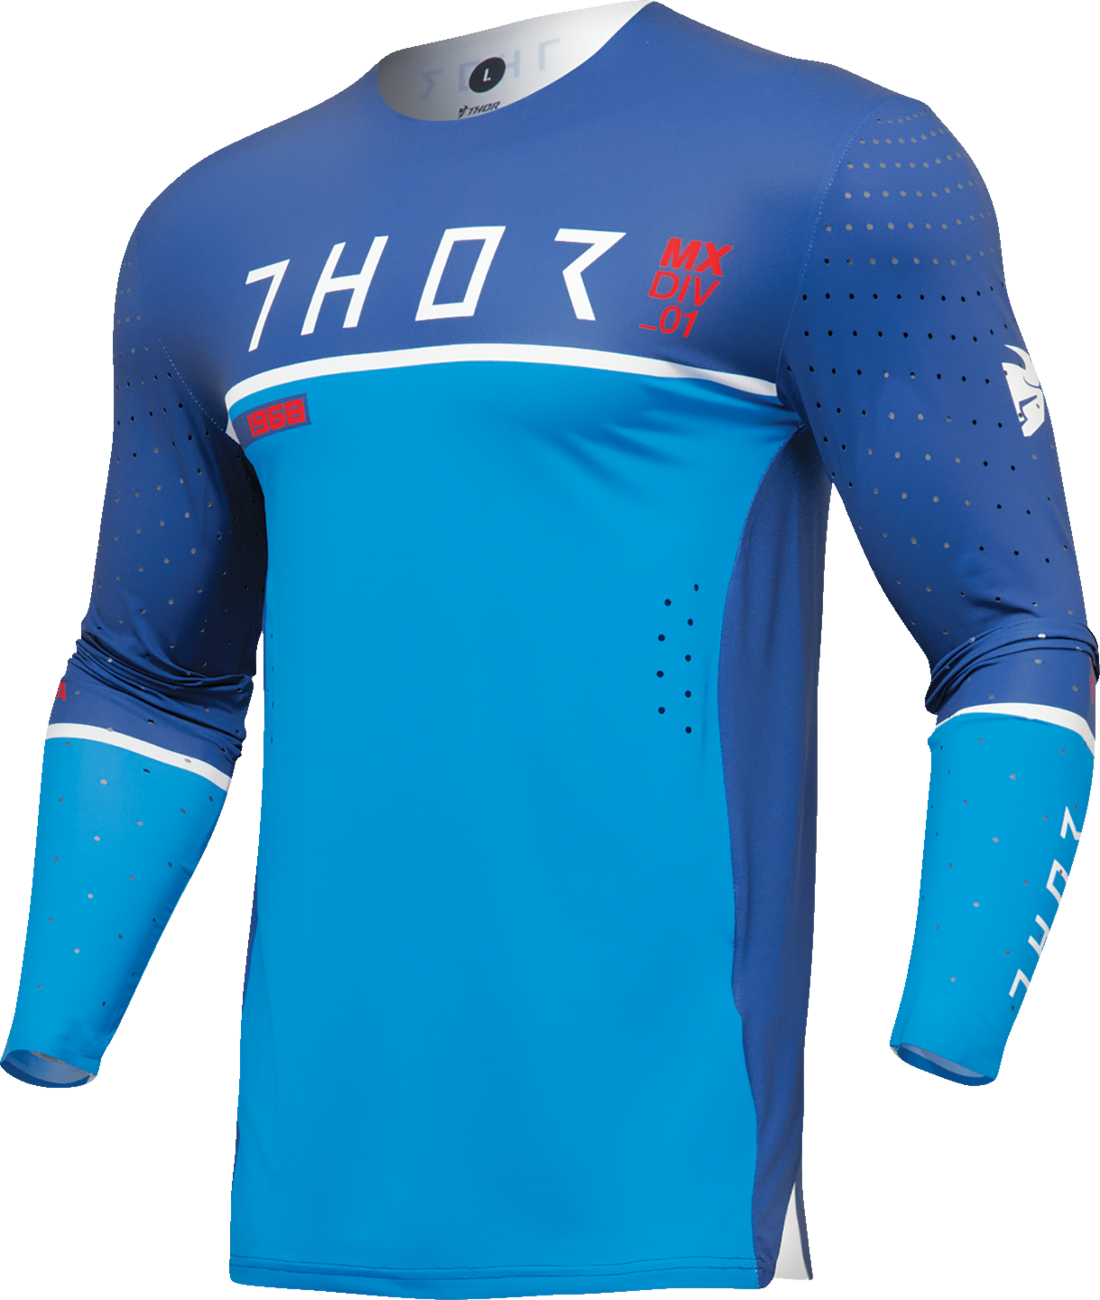 THOR Prime Ace Jersey - Navy/Blue - XL 2910-7674